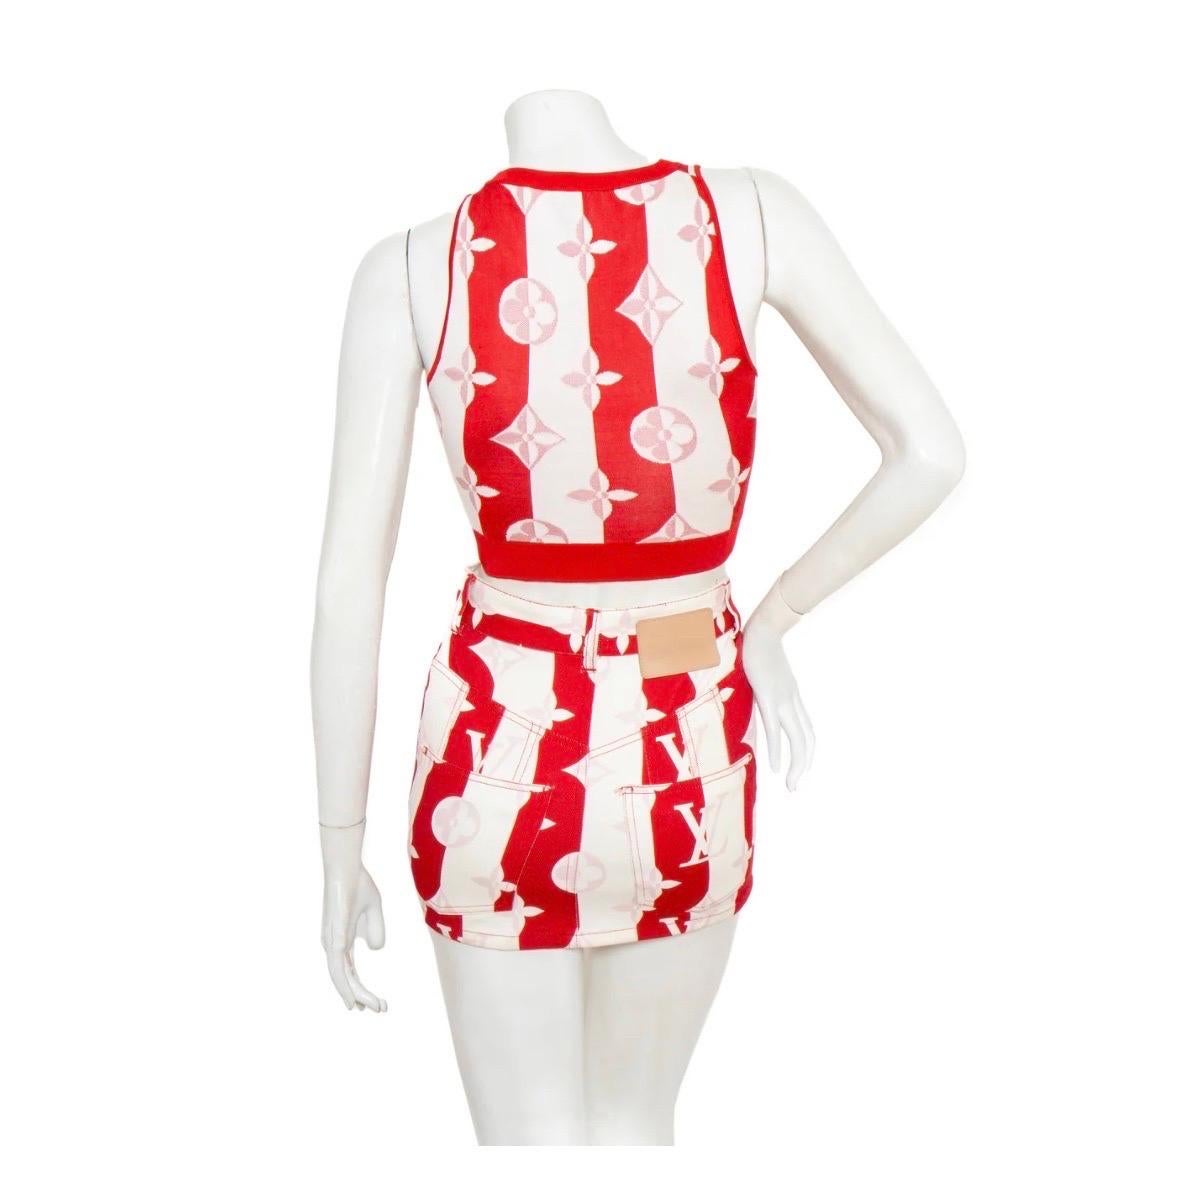 Monogram two-piece set by Louis Vuitton
Knit Top & Denim Skirt
Made in Italy
 Top Details:

Halter knit sleeveless top 
Ribbed neckline and hem
Overall contrast logo
Flower monogram pattern
Red and white stripe background
Composition: 56% silk, 34%